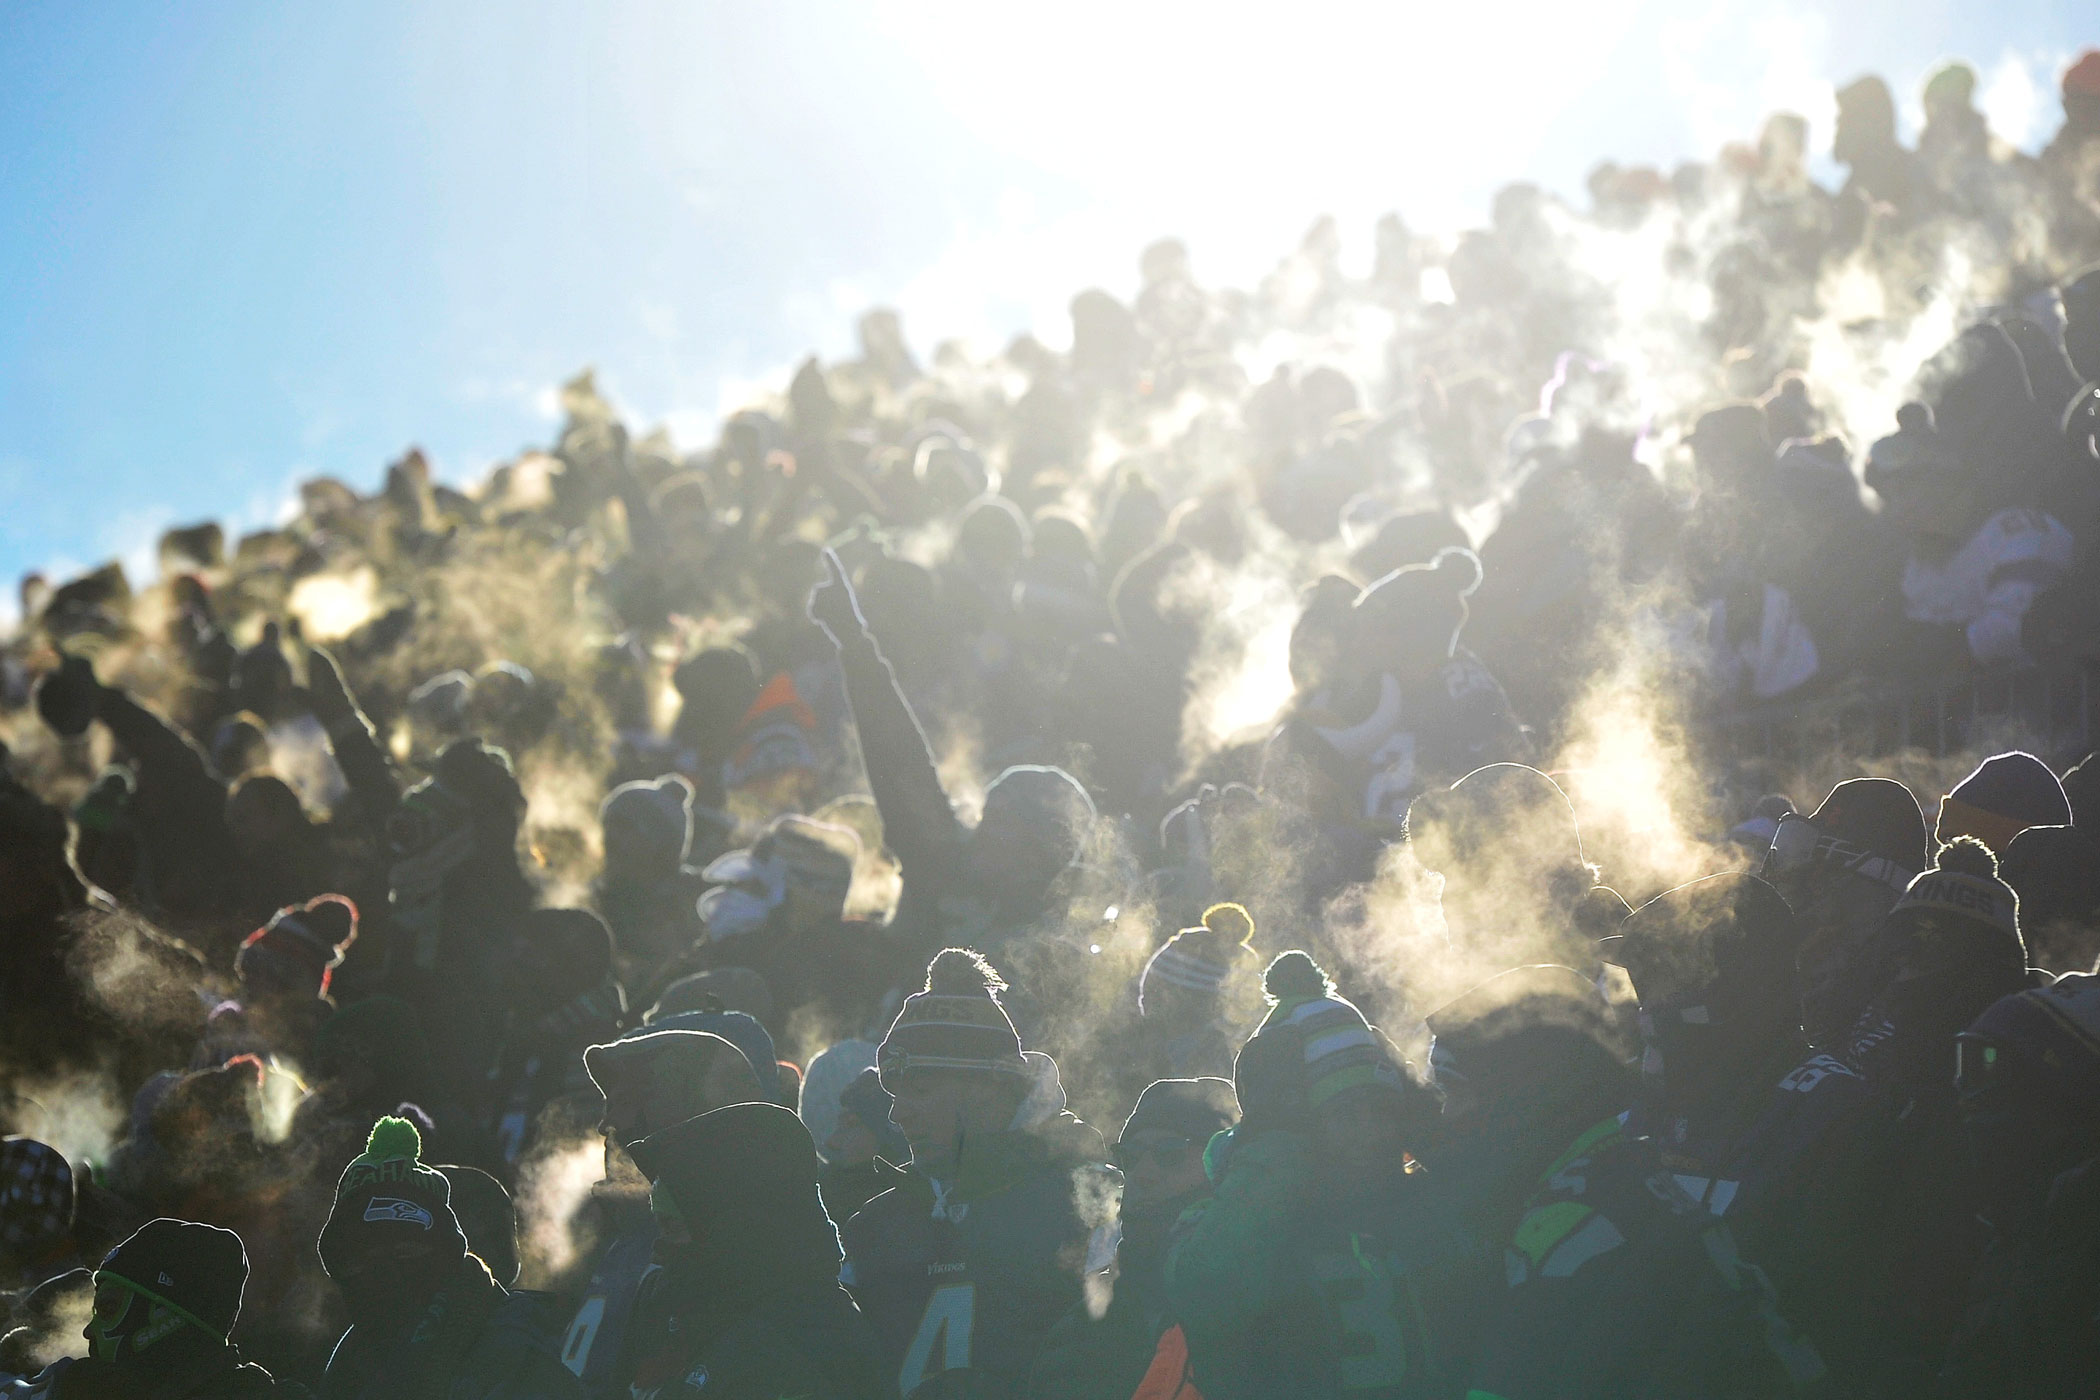 Temperature: -6°F (Wind Chill -25°F). On Jan. 10, 2016, fans braved subzero temperatures at an NFL football playoff game between the Minnesota Vikings and the Seattle Seahawks at TCFBank Stadium in Minneapolis.